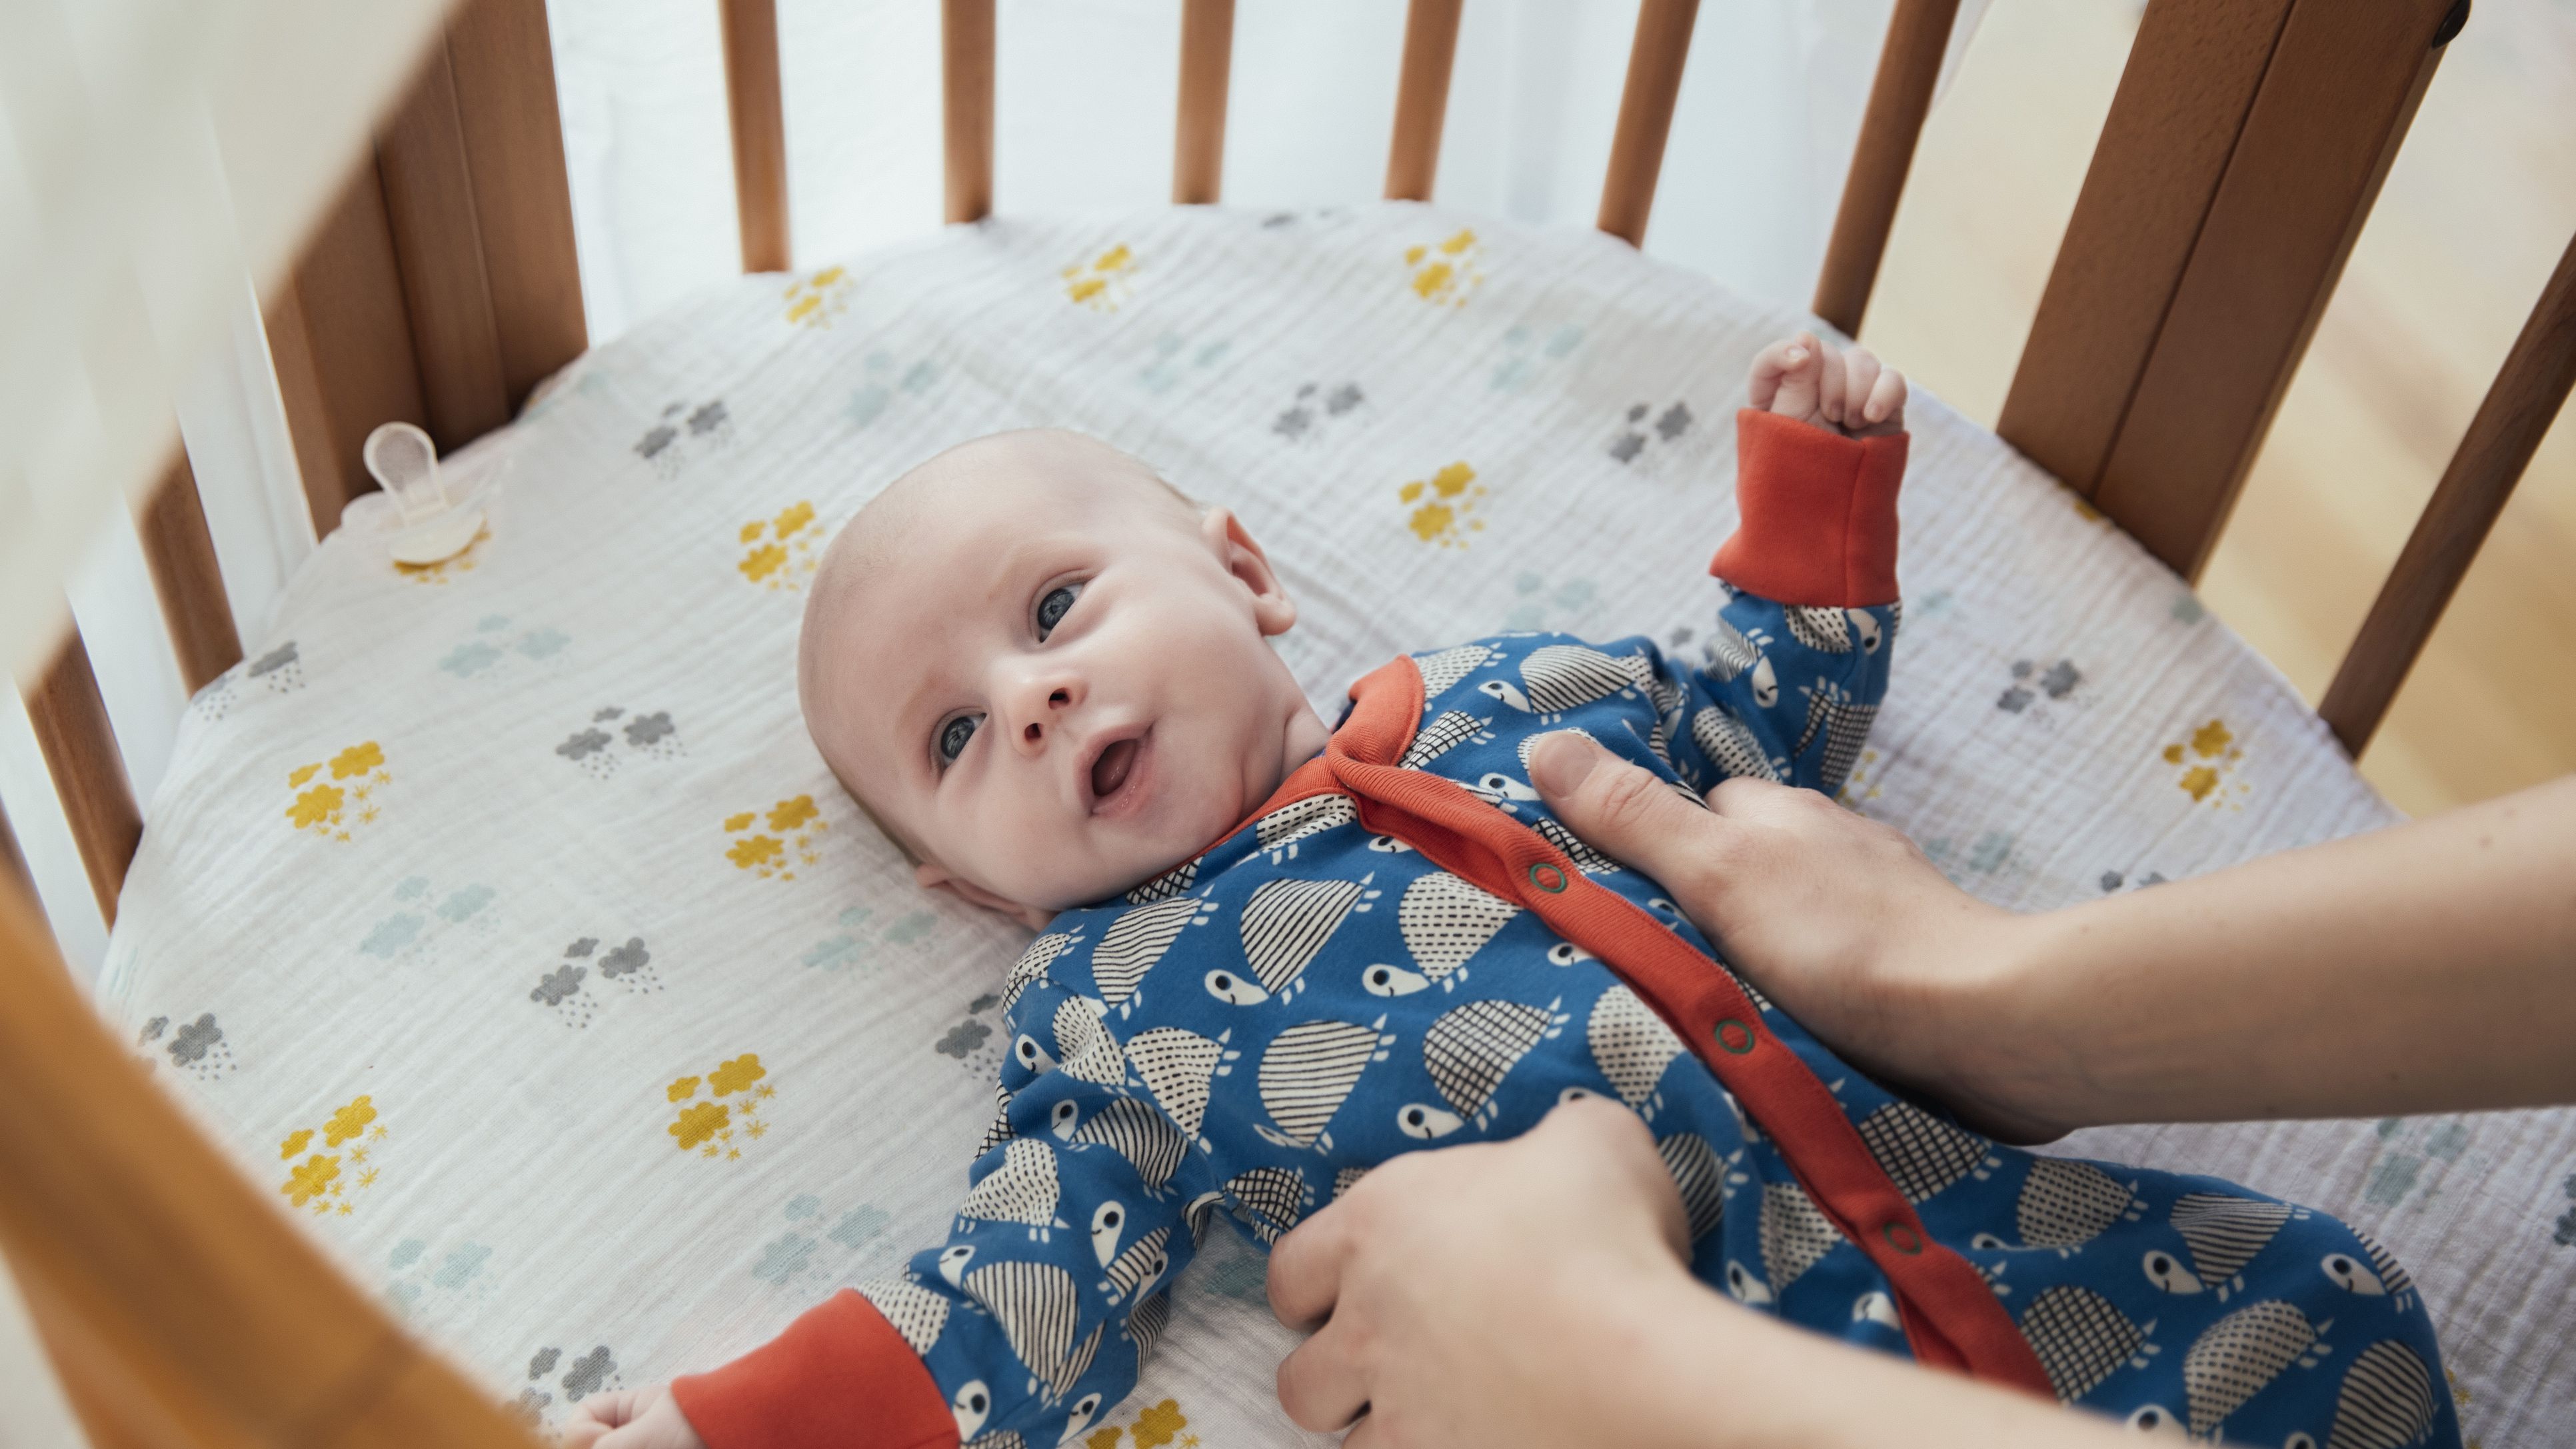 5 Baby Cradle Safety Standards You Must Look For 